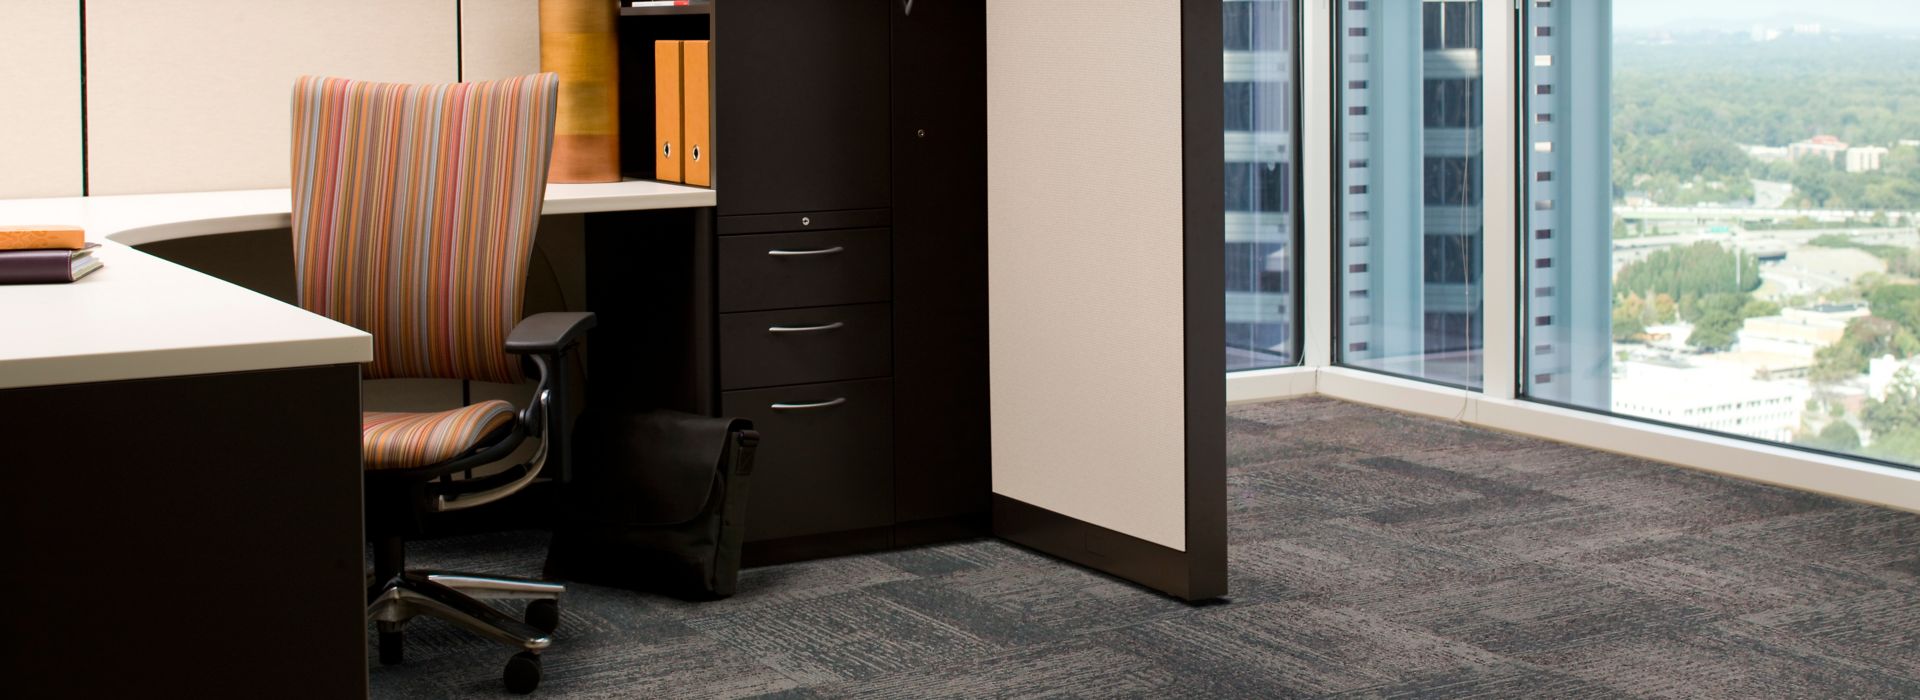 Interface Plain Weave carpet tile in private office